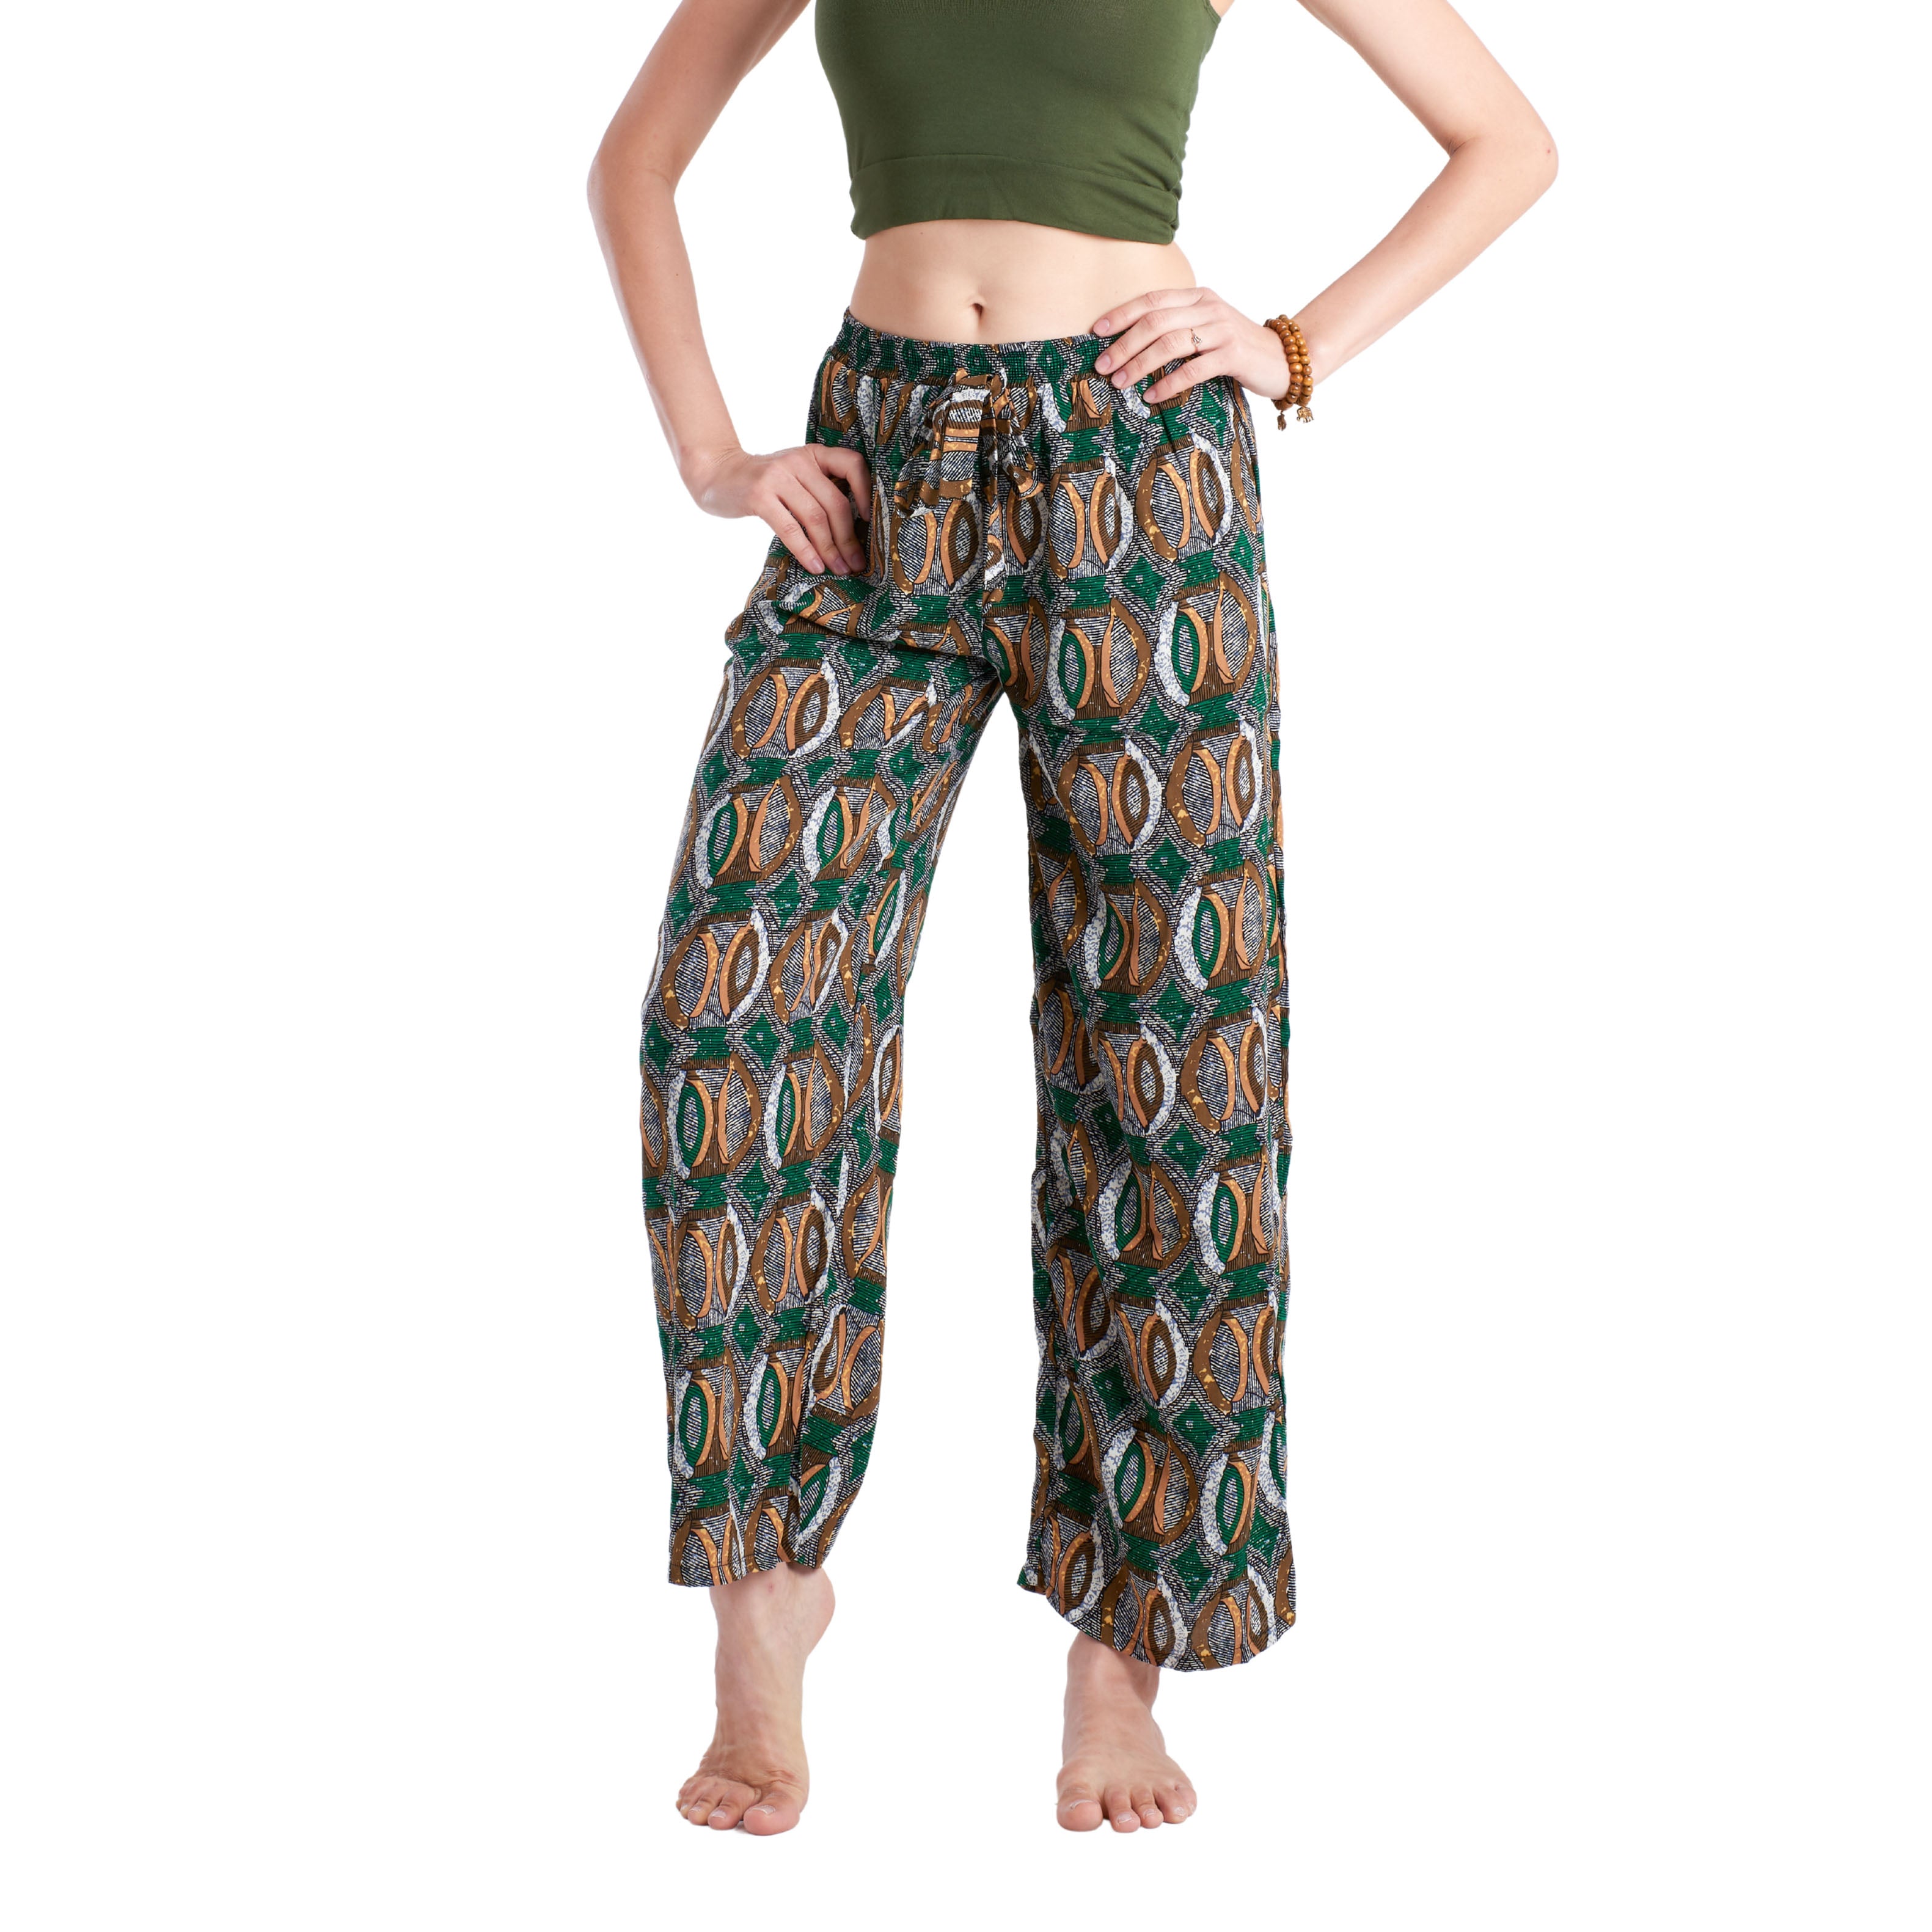 MISTIQ PANTS Elepanta Casual Pants - Buy Today Elephant Pants Jewelry And Bohemian Clothes Handmade In Thailand Help To Save The Elephants FairTrade And Vegan